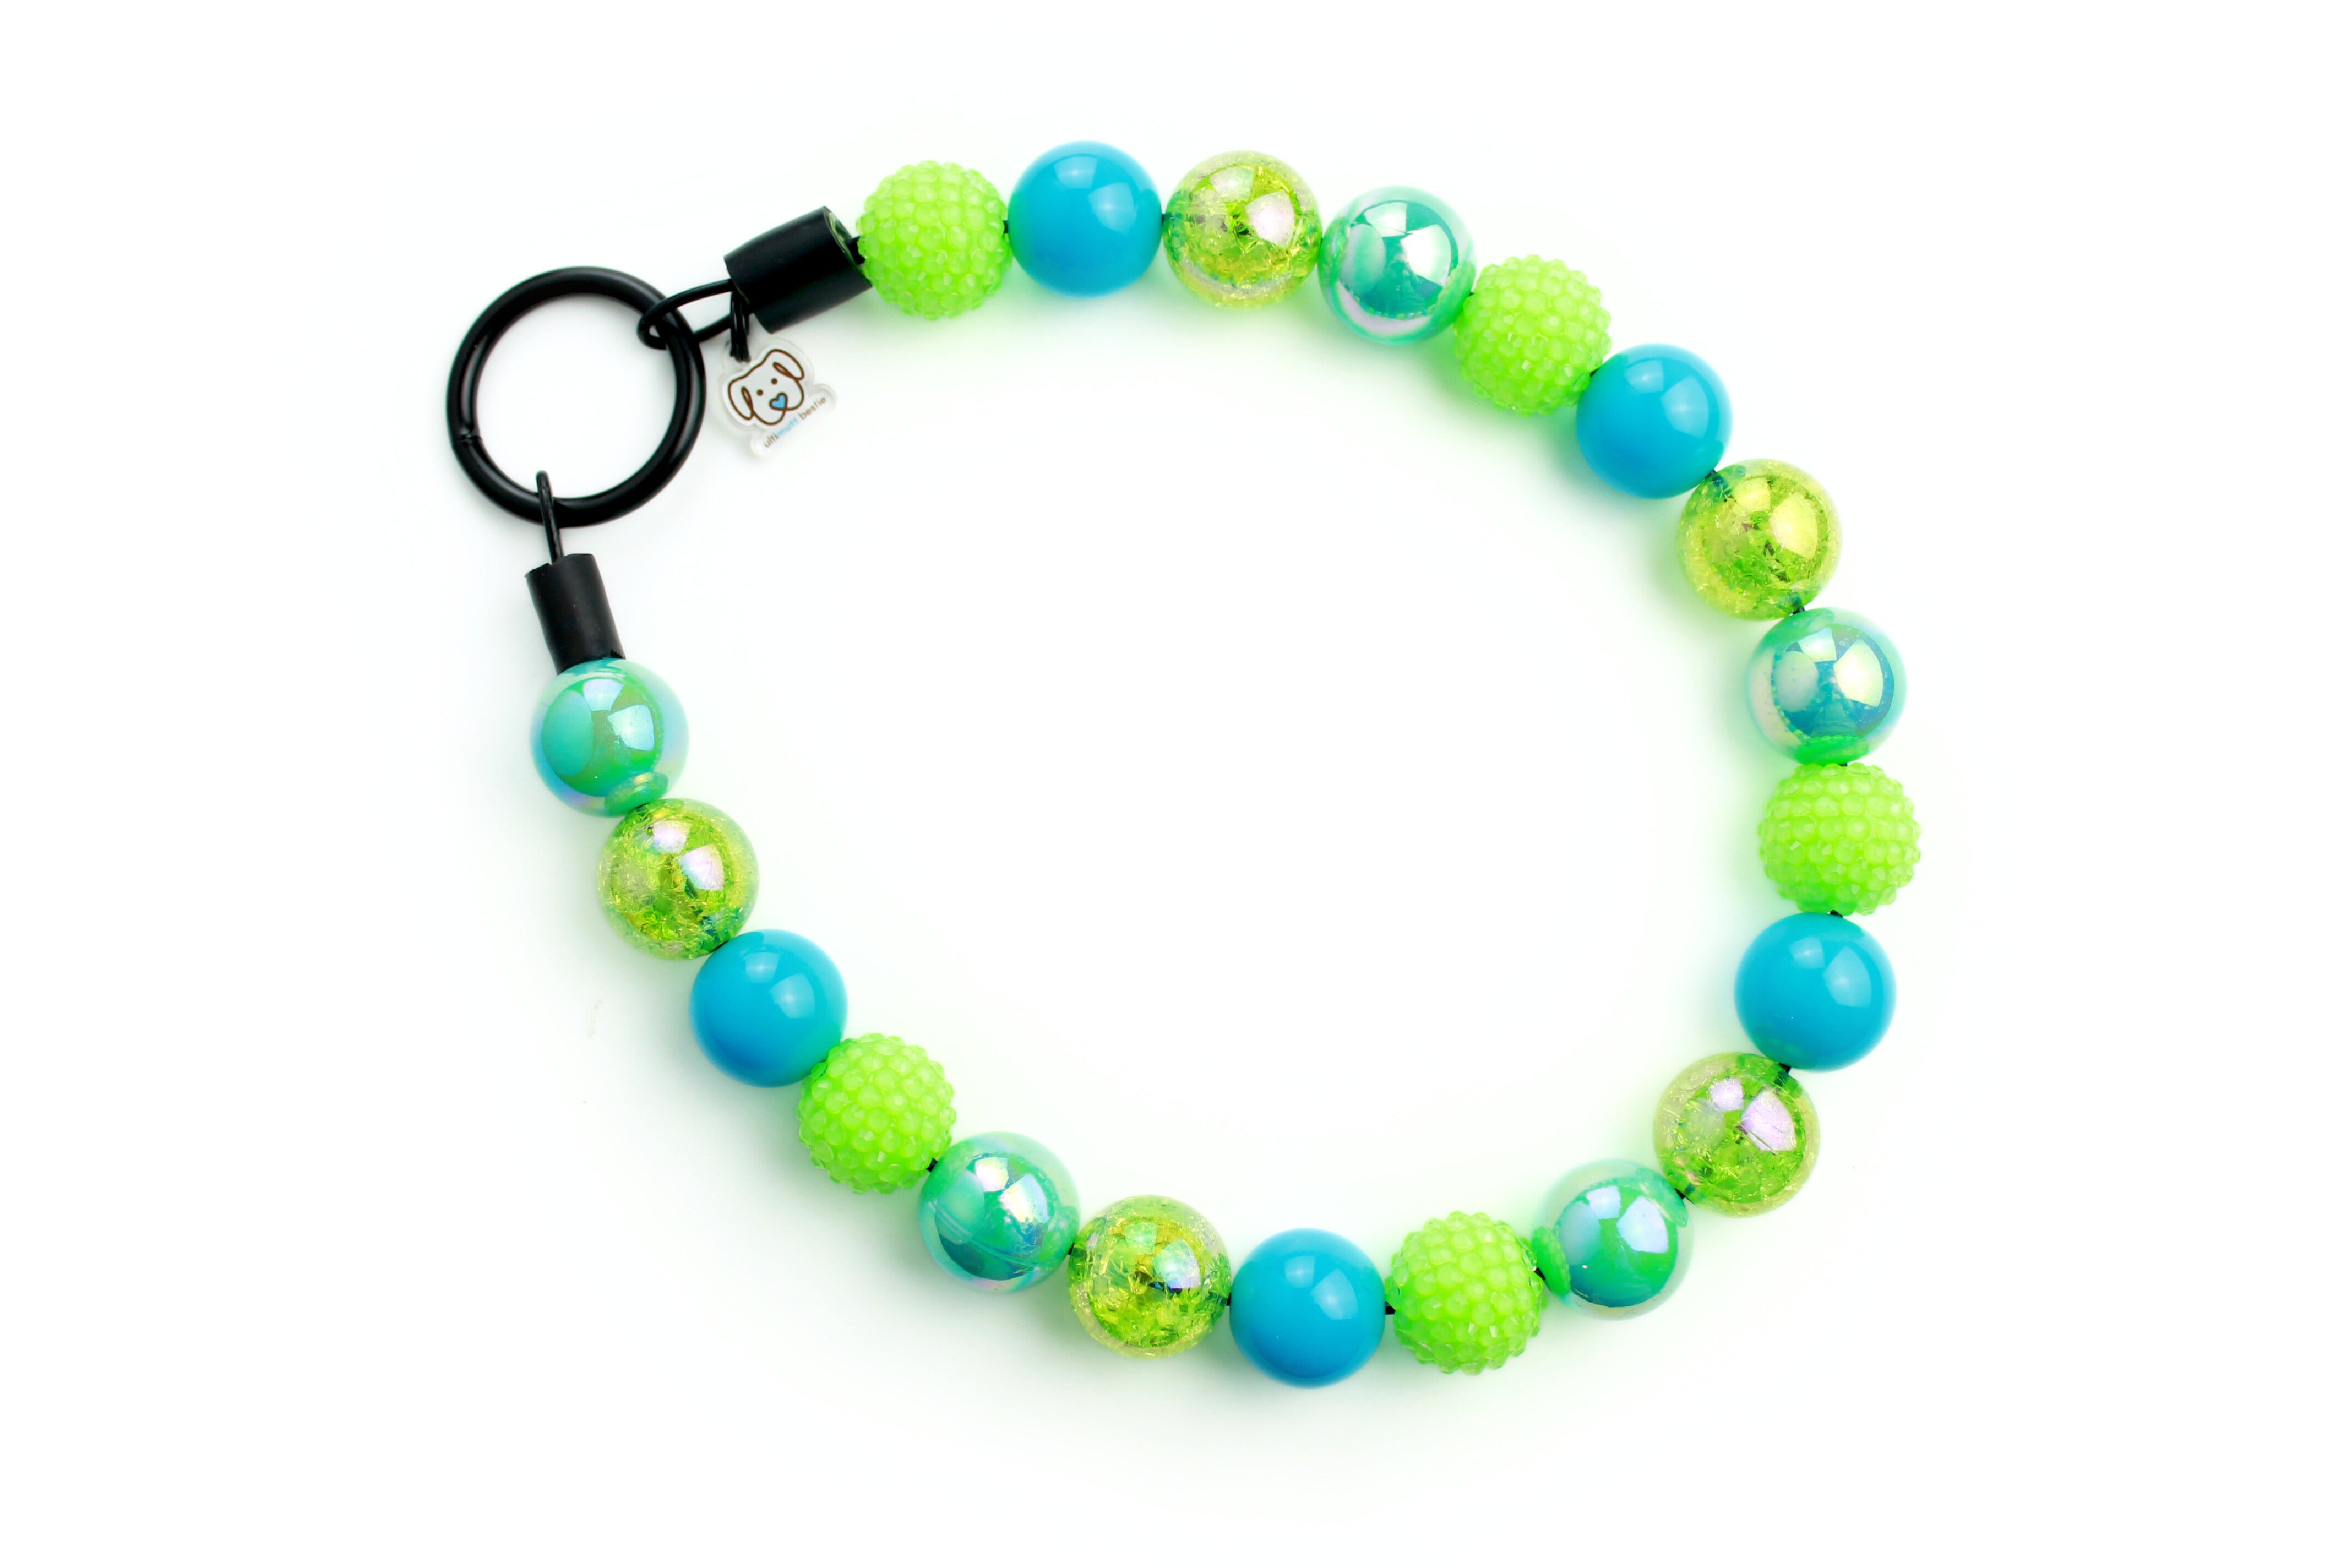 Dog beaded collar neon green and bright blues.